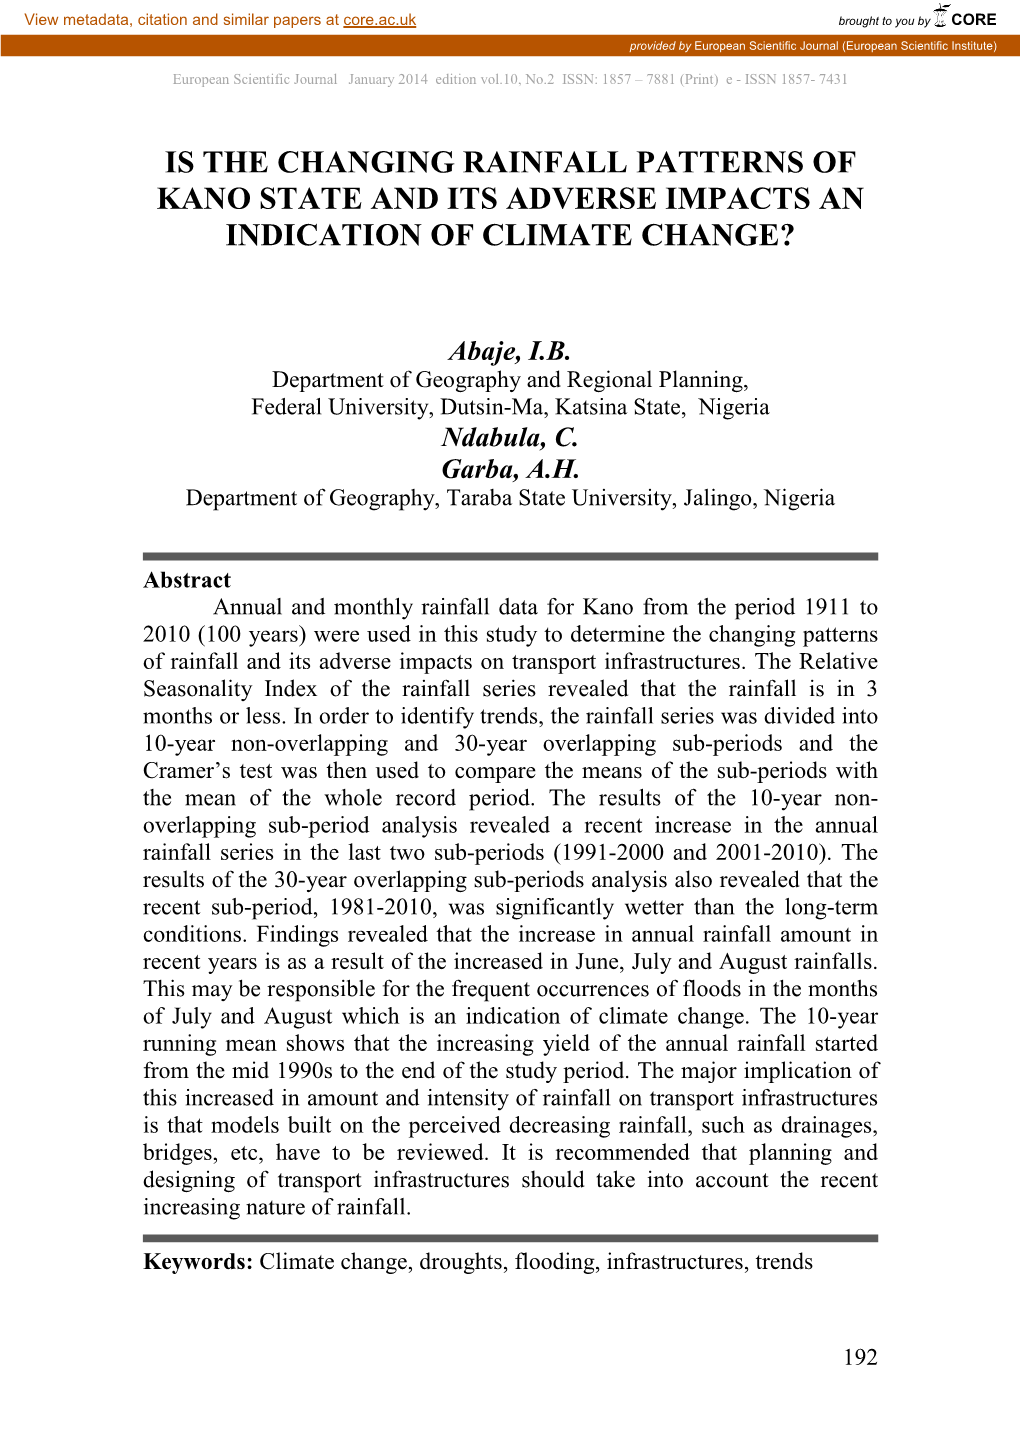 Is the Changing Rainfall Patterns of Kano State and Its Adverse Impacts an Indication of Climate Change?